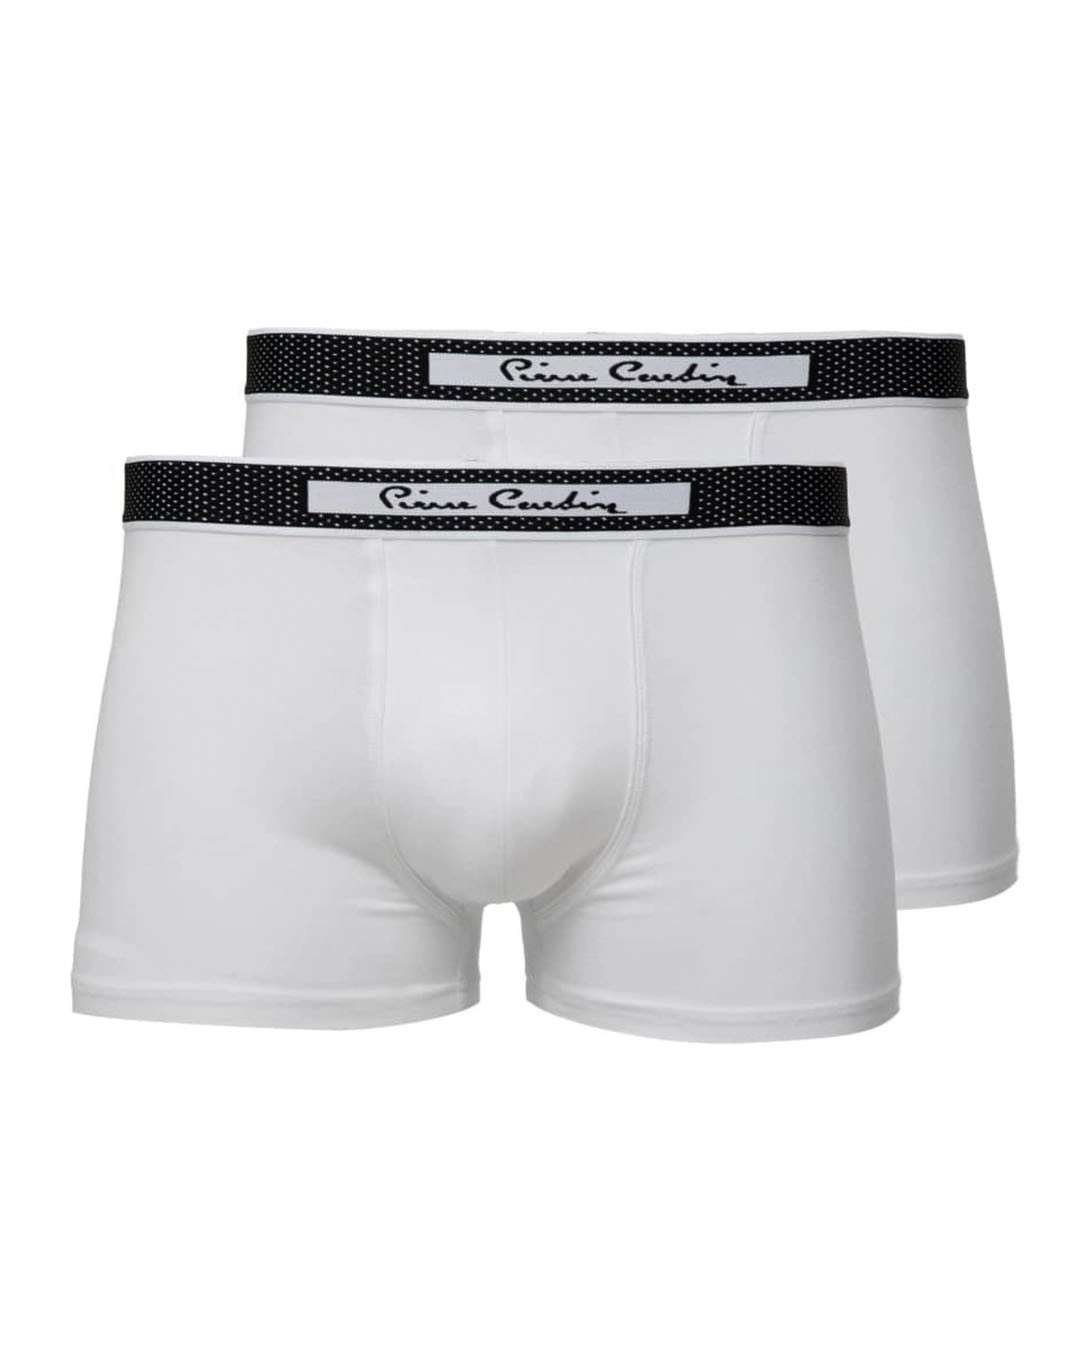 Boxers, Buy Online at Affordable Prices